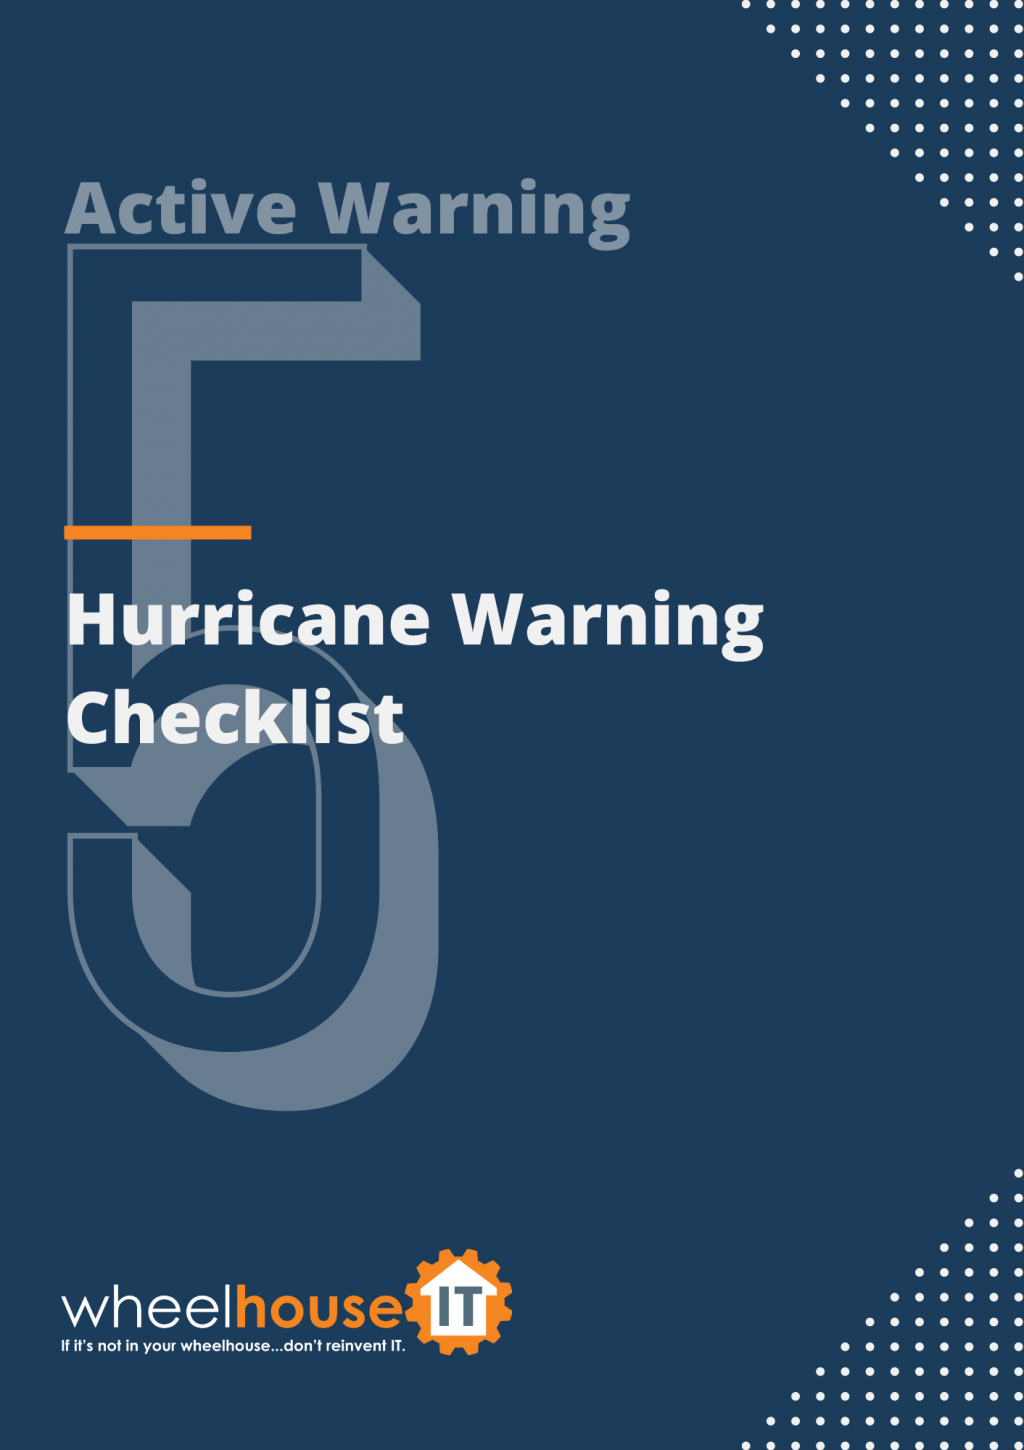 the cover of an active warning manual